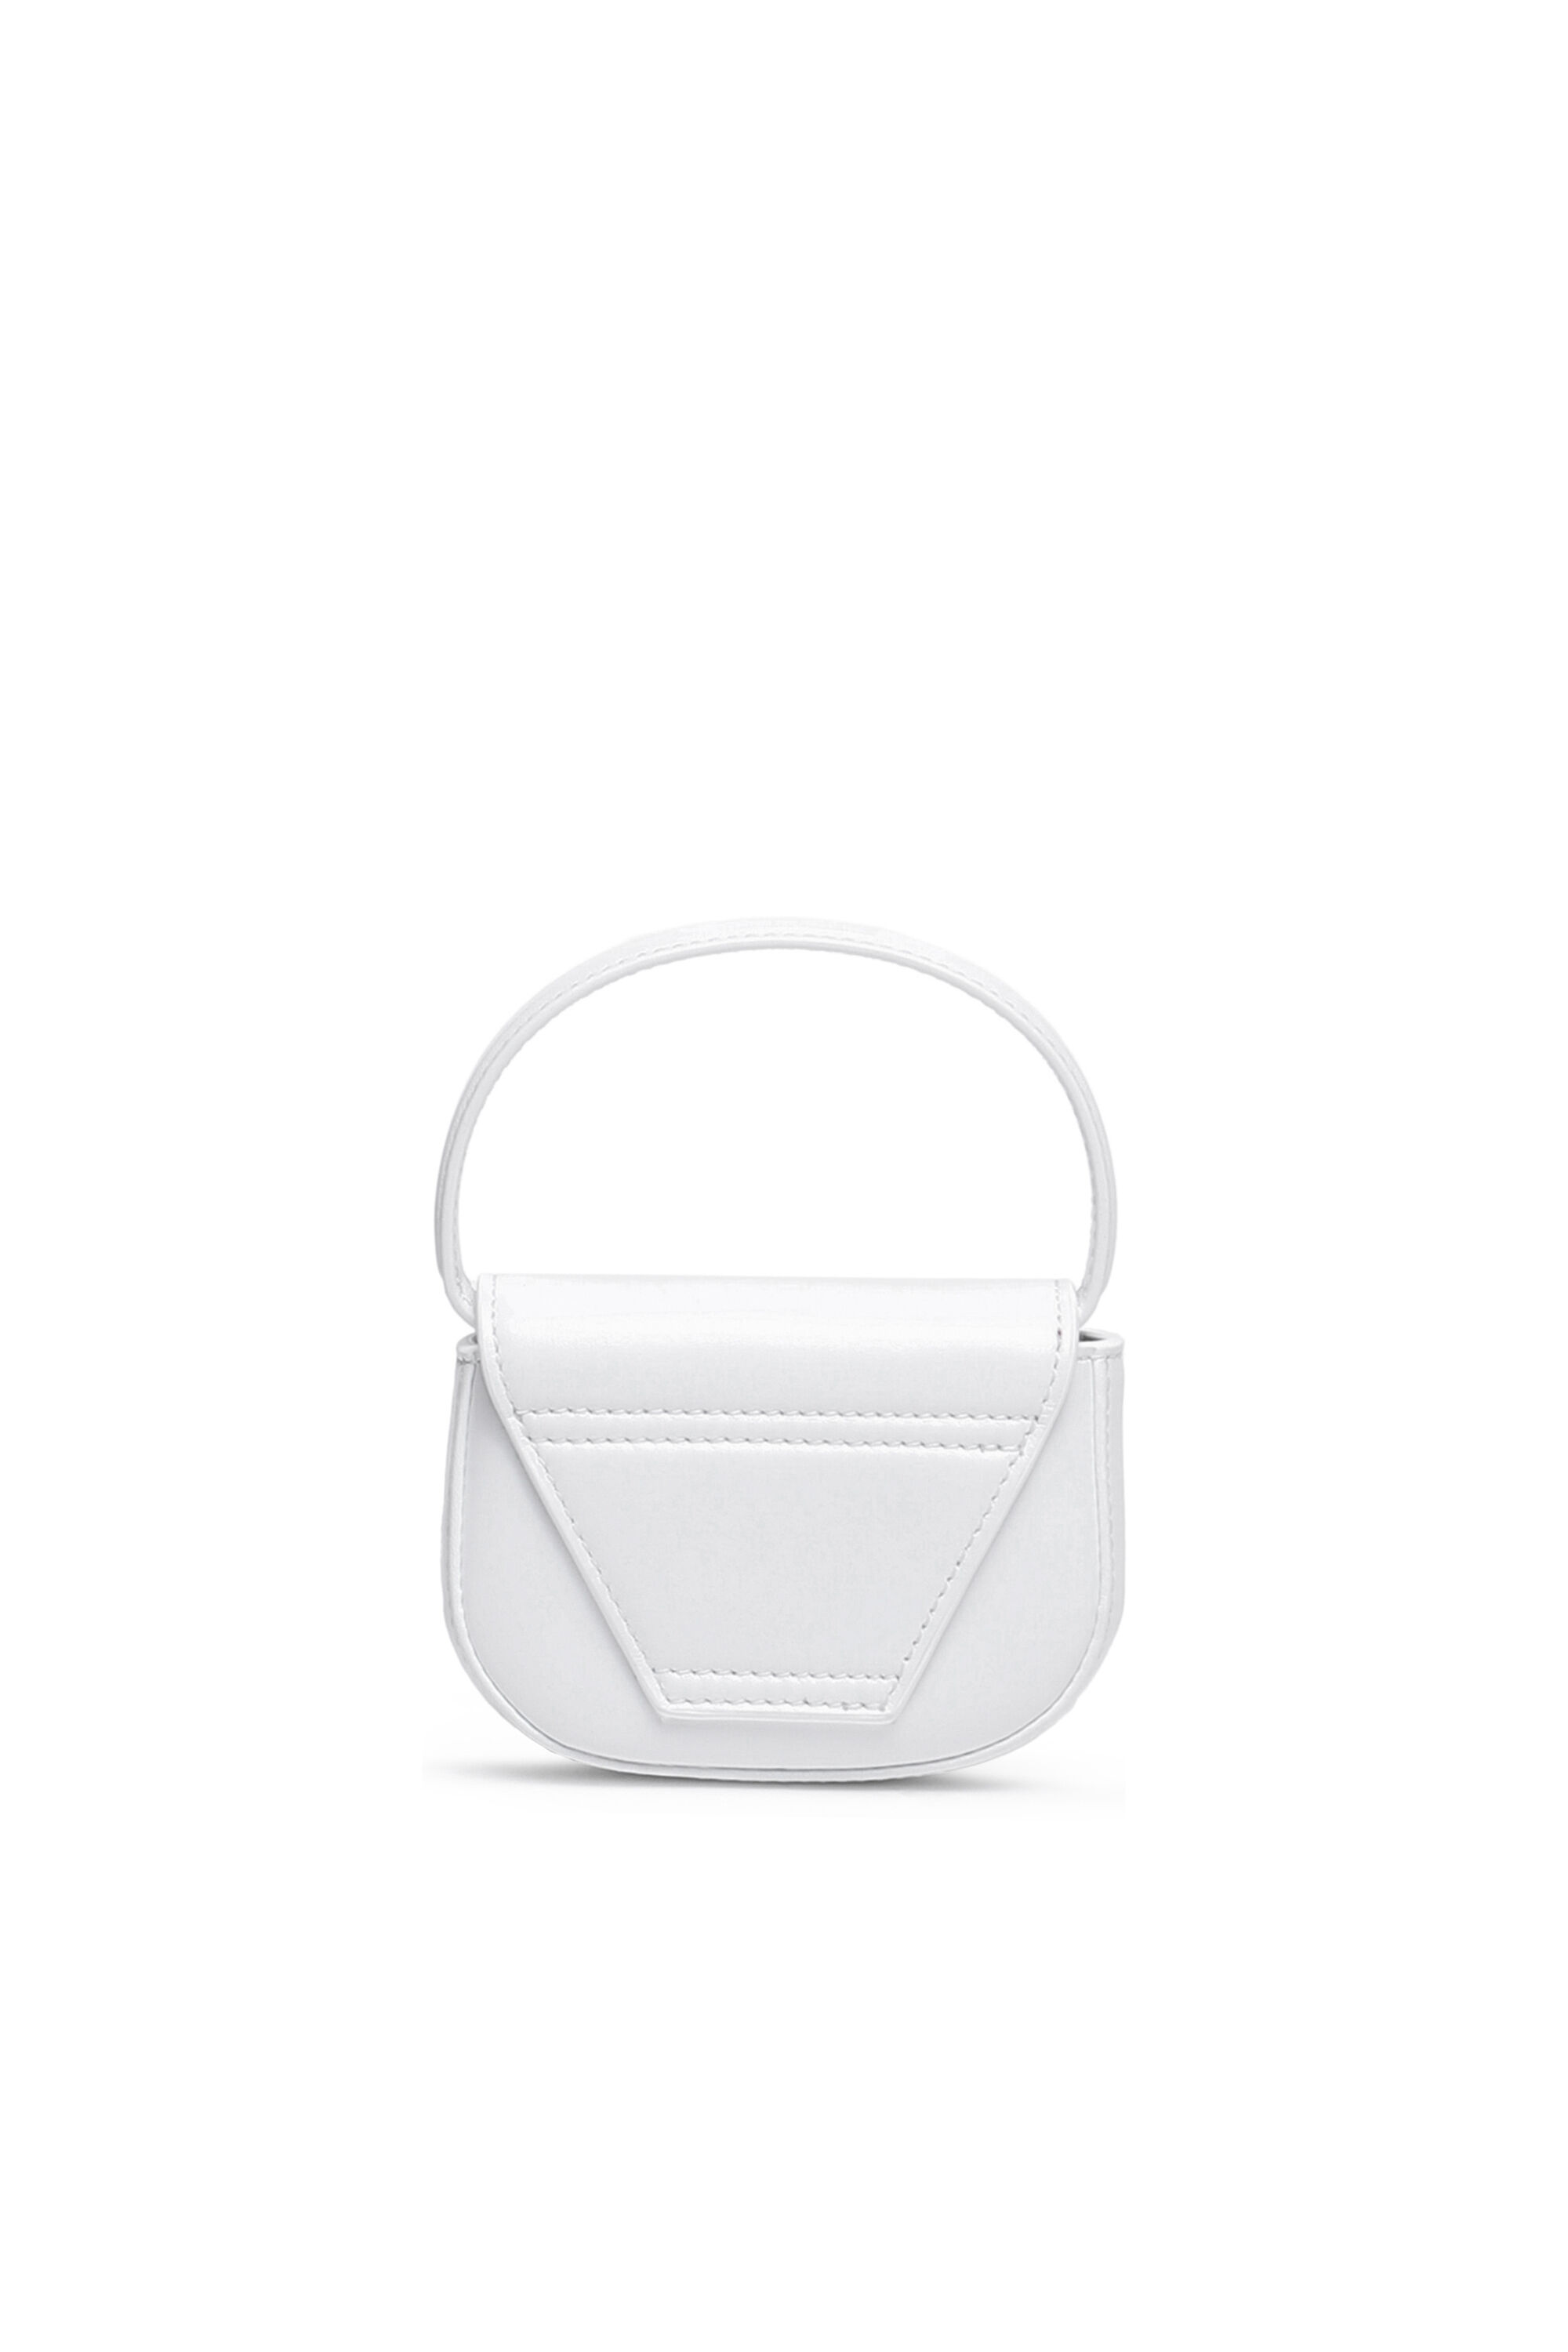 Diesel - 1DR XS, Woman 1DR XS-Iconic mini bag with D logo plaque in White - Image 3